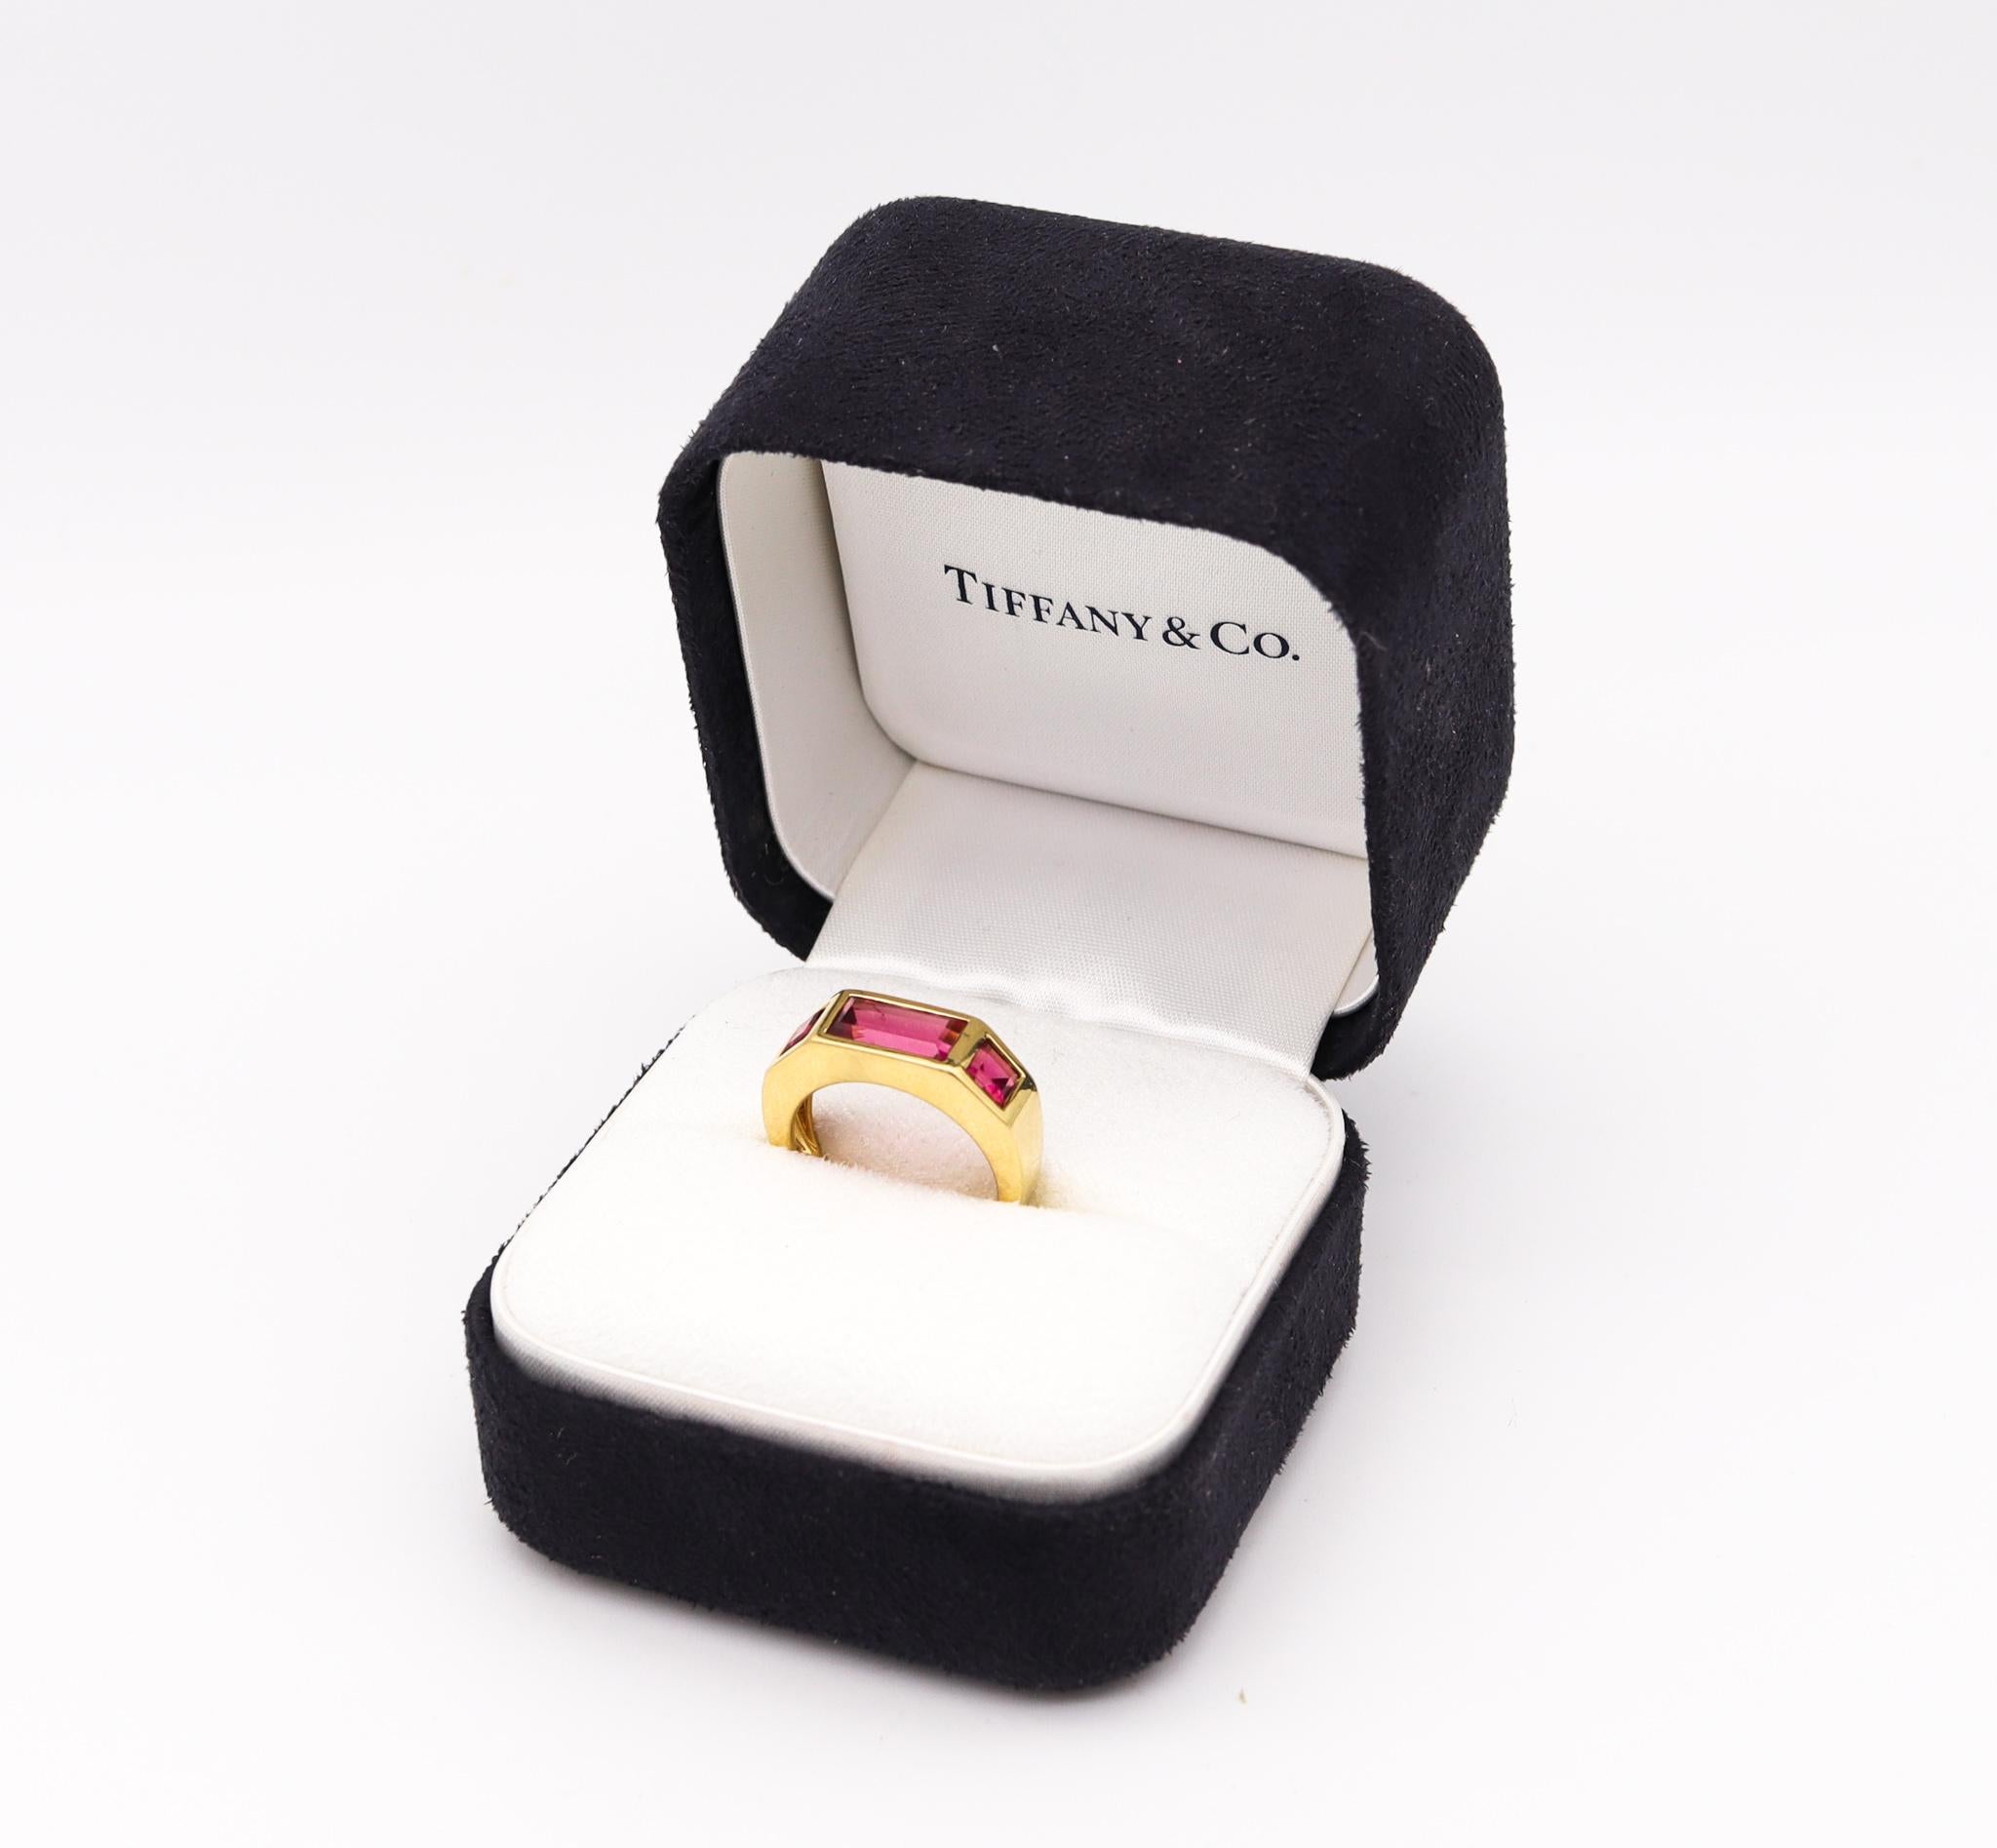 Geometric ring designed by Paloma Picasso for Tiffany & Co.

Beautiful piece, created at the Tiffany Studios in New York city by Paloma Picasso, back in the late 1980's. This geometric band ring has been carefully crafted in solid yellow gold of 18